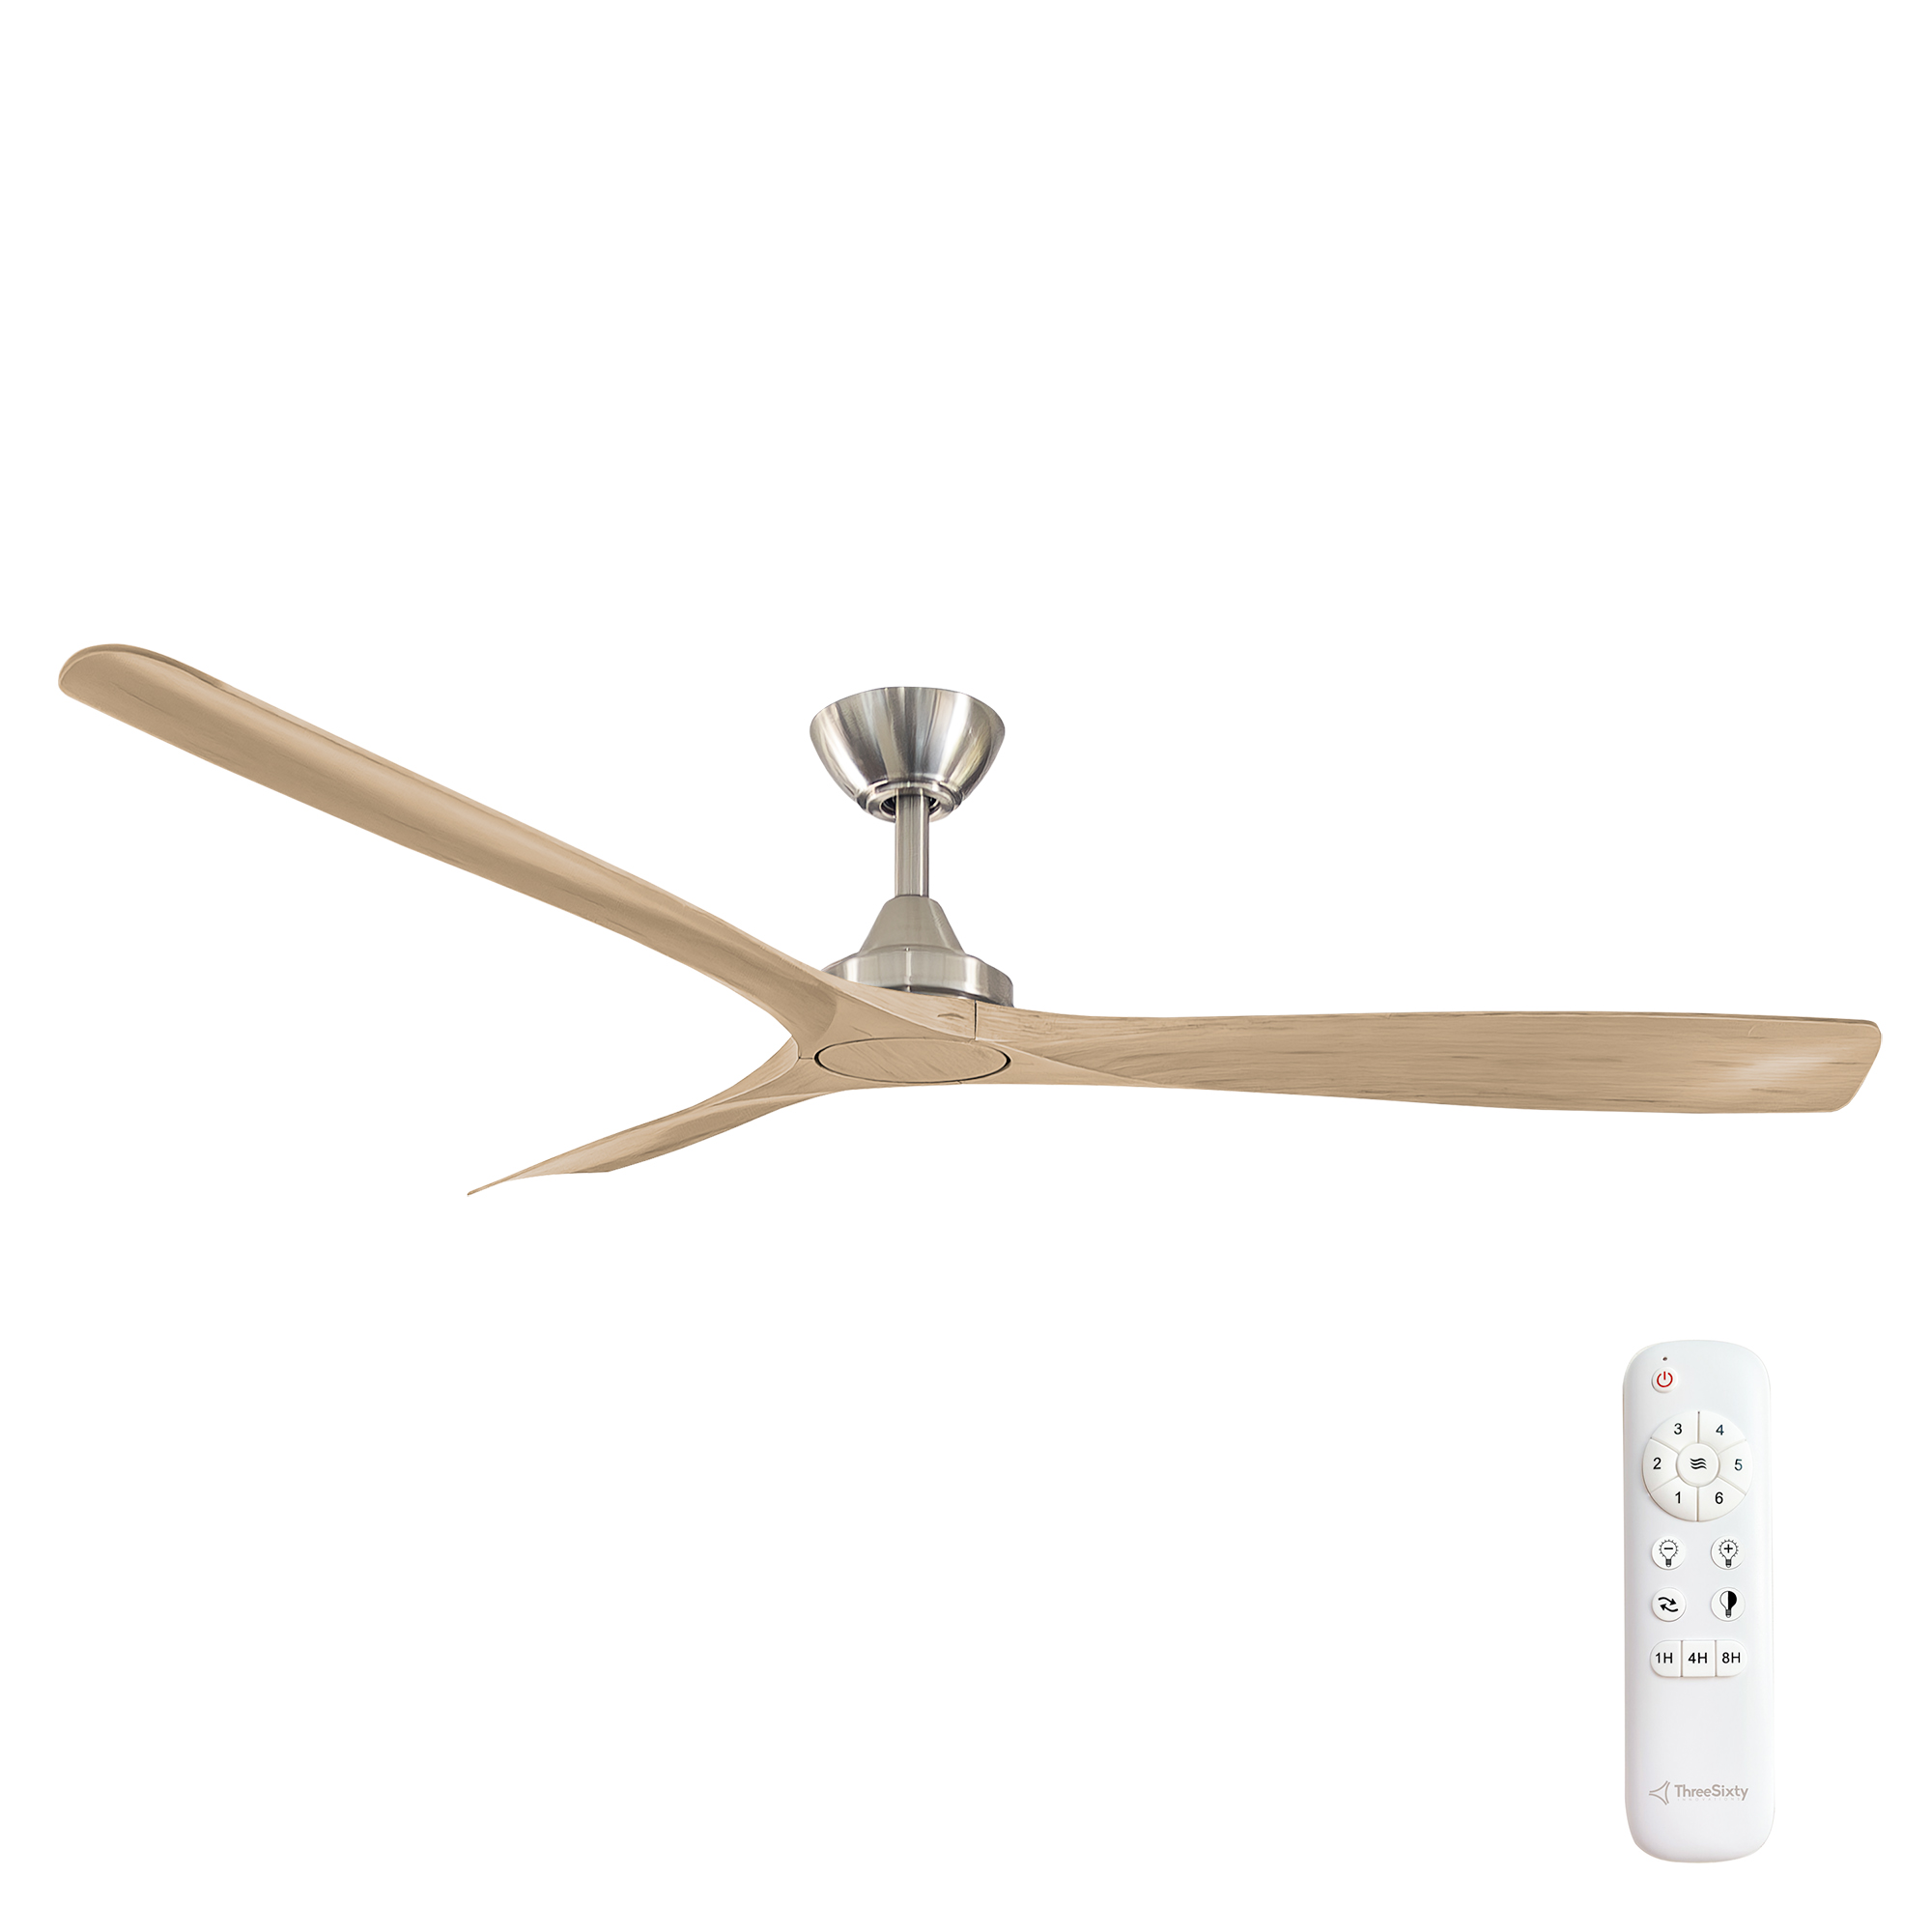 60" Spitfire DC Ceiling Fan in Brushed Nickel with Natural blades